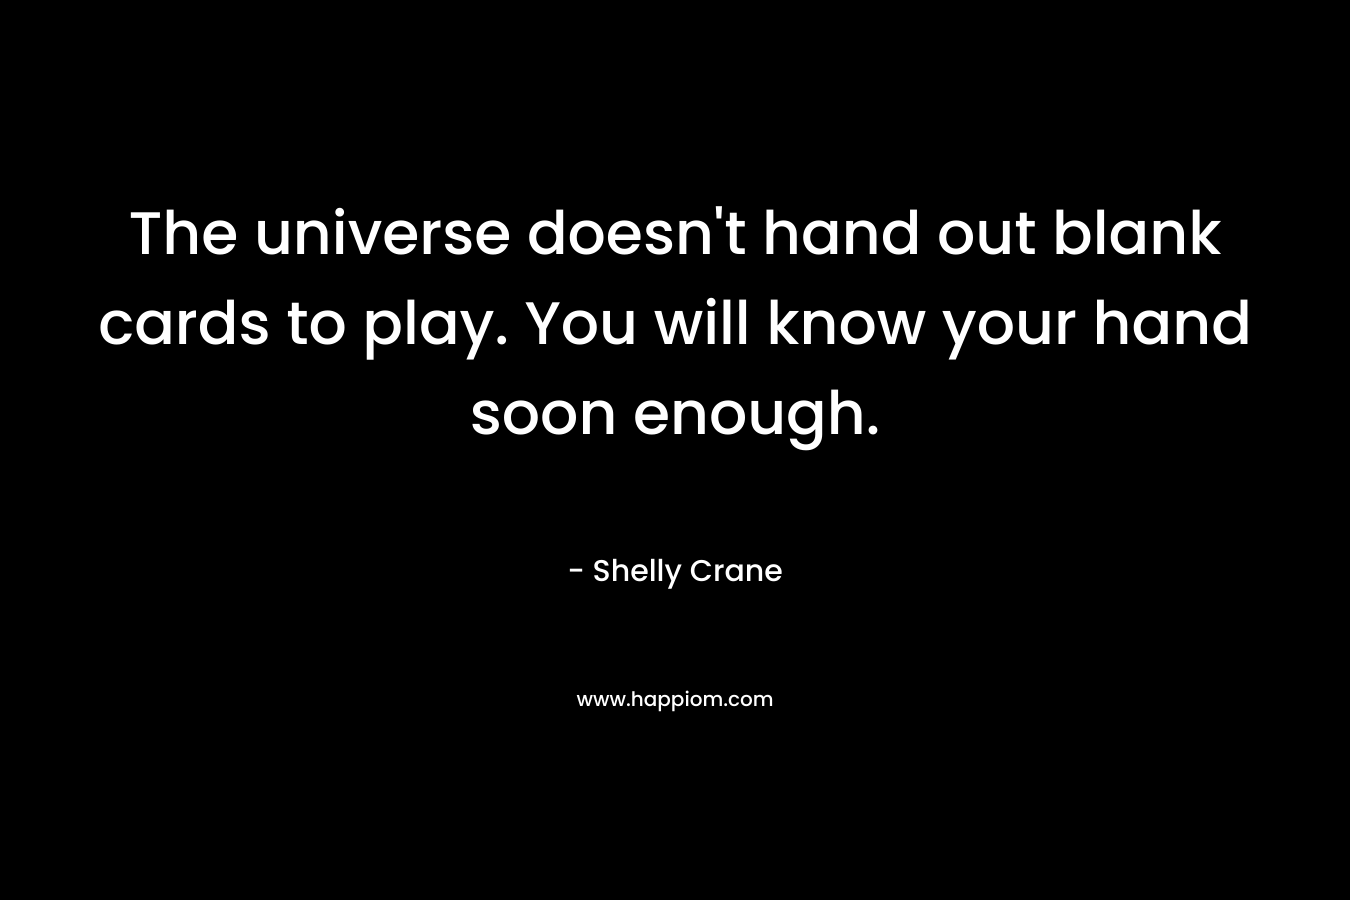 The universe doesn’t hand out blank cards to play. You will know your hand soon enough. – Shelly Crane